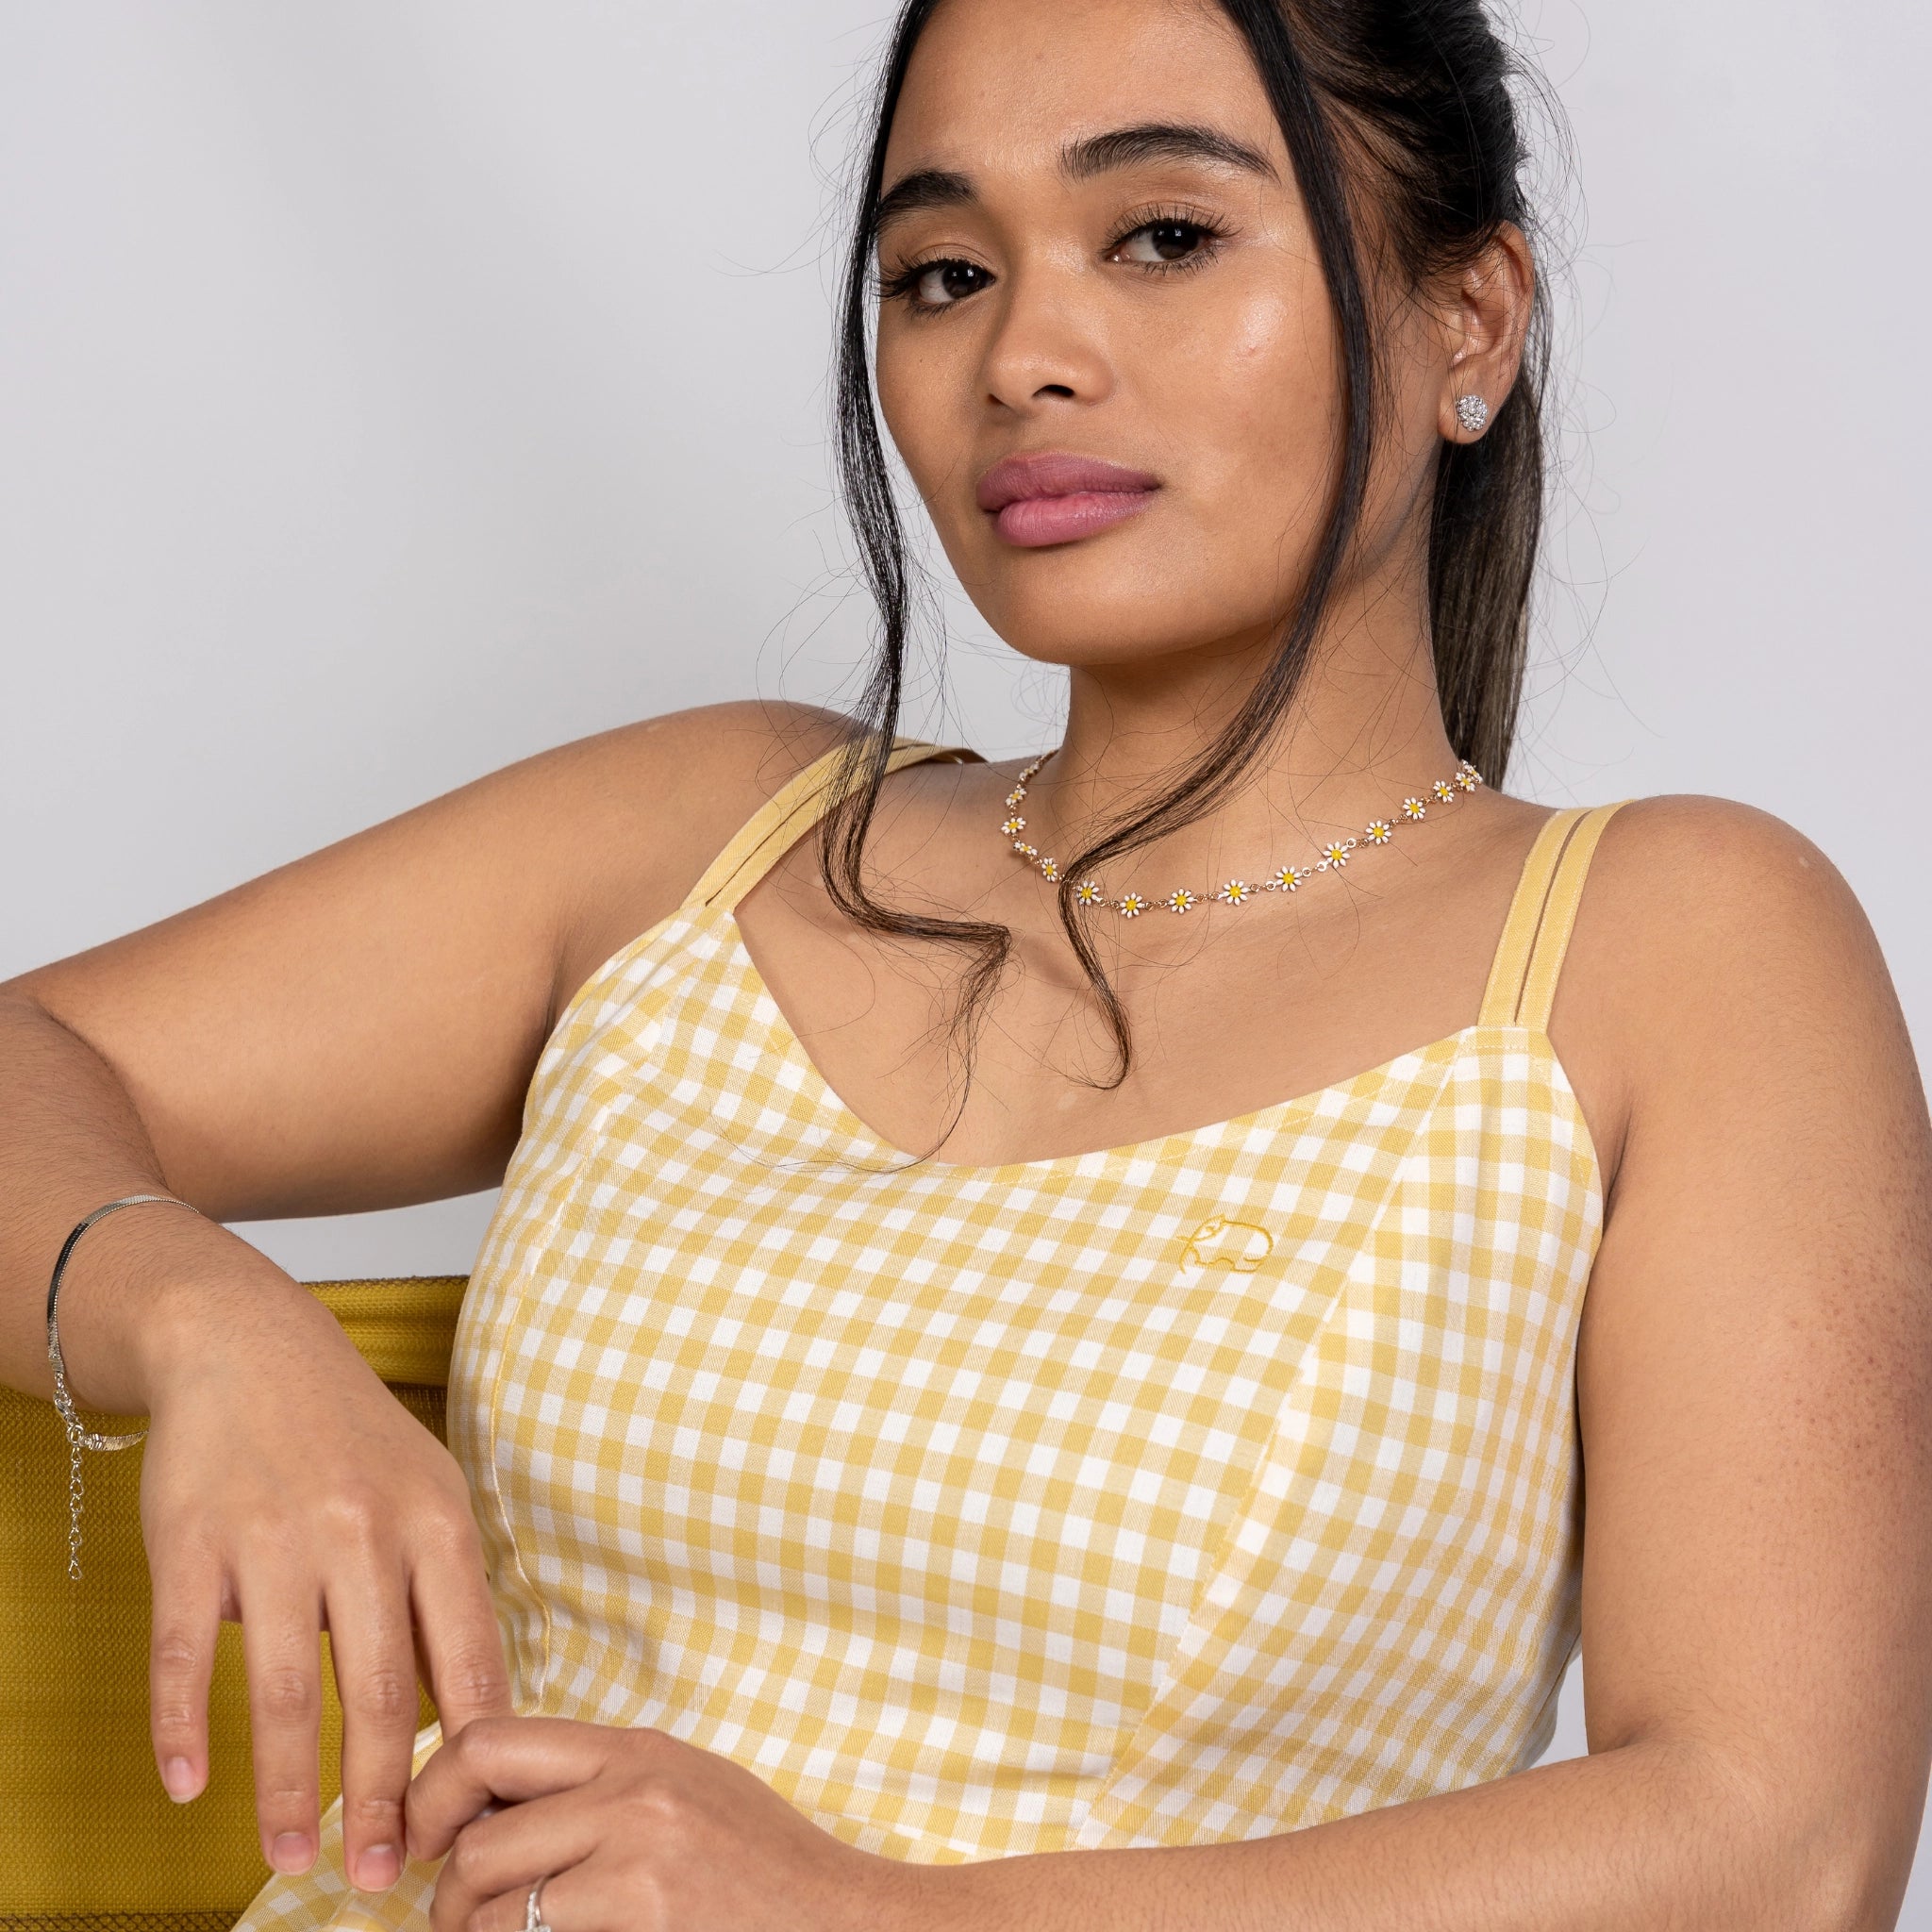 A woman with long dark hair, wearing a limited-edition Karee Sunshine Chic Yellow Gingham Cotton Mini Dress, sits with one arm resting on a chair. She has a neutral expression and is adorned with earrings and a necklace.